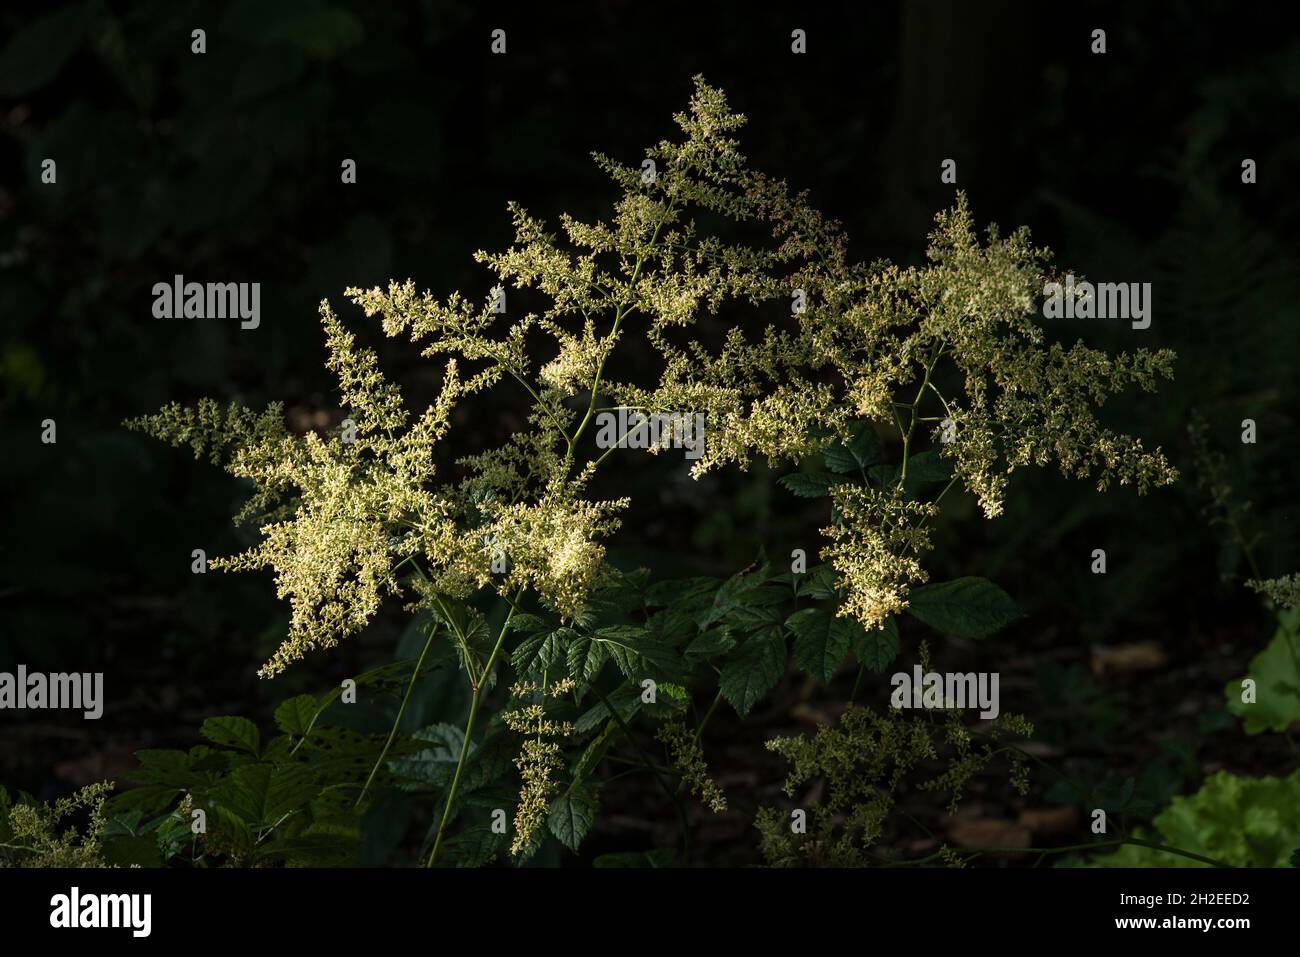 Sunlight picks out the off-white Astilbe 'Deutschland' Japonica hybrid, in the shadow under a tall tree. AKA False Goat's Beard or False Spirea. Stock Photo